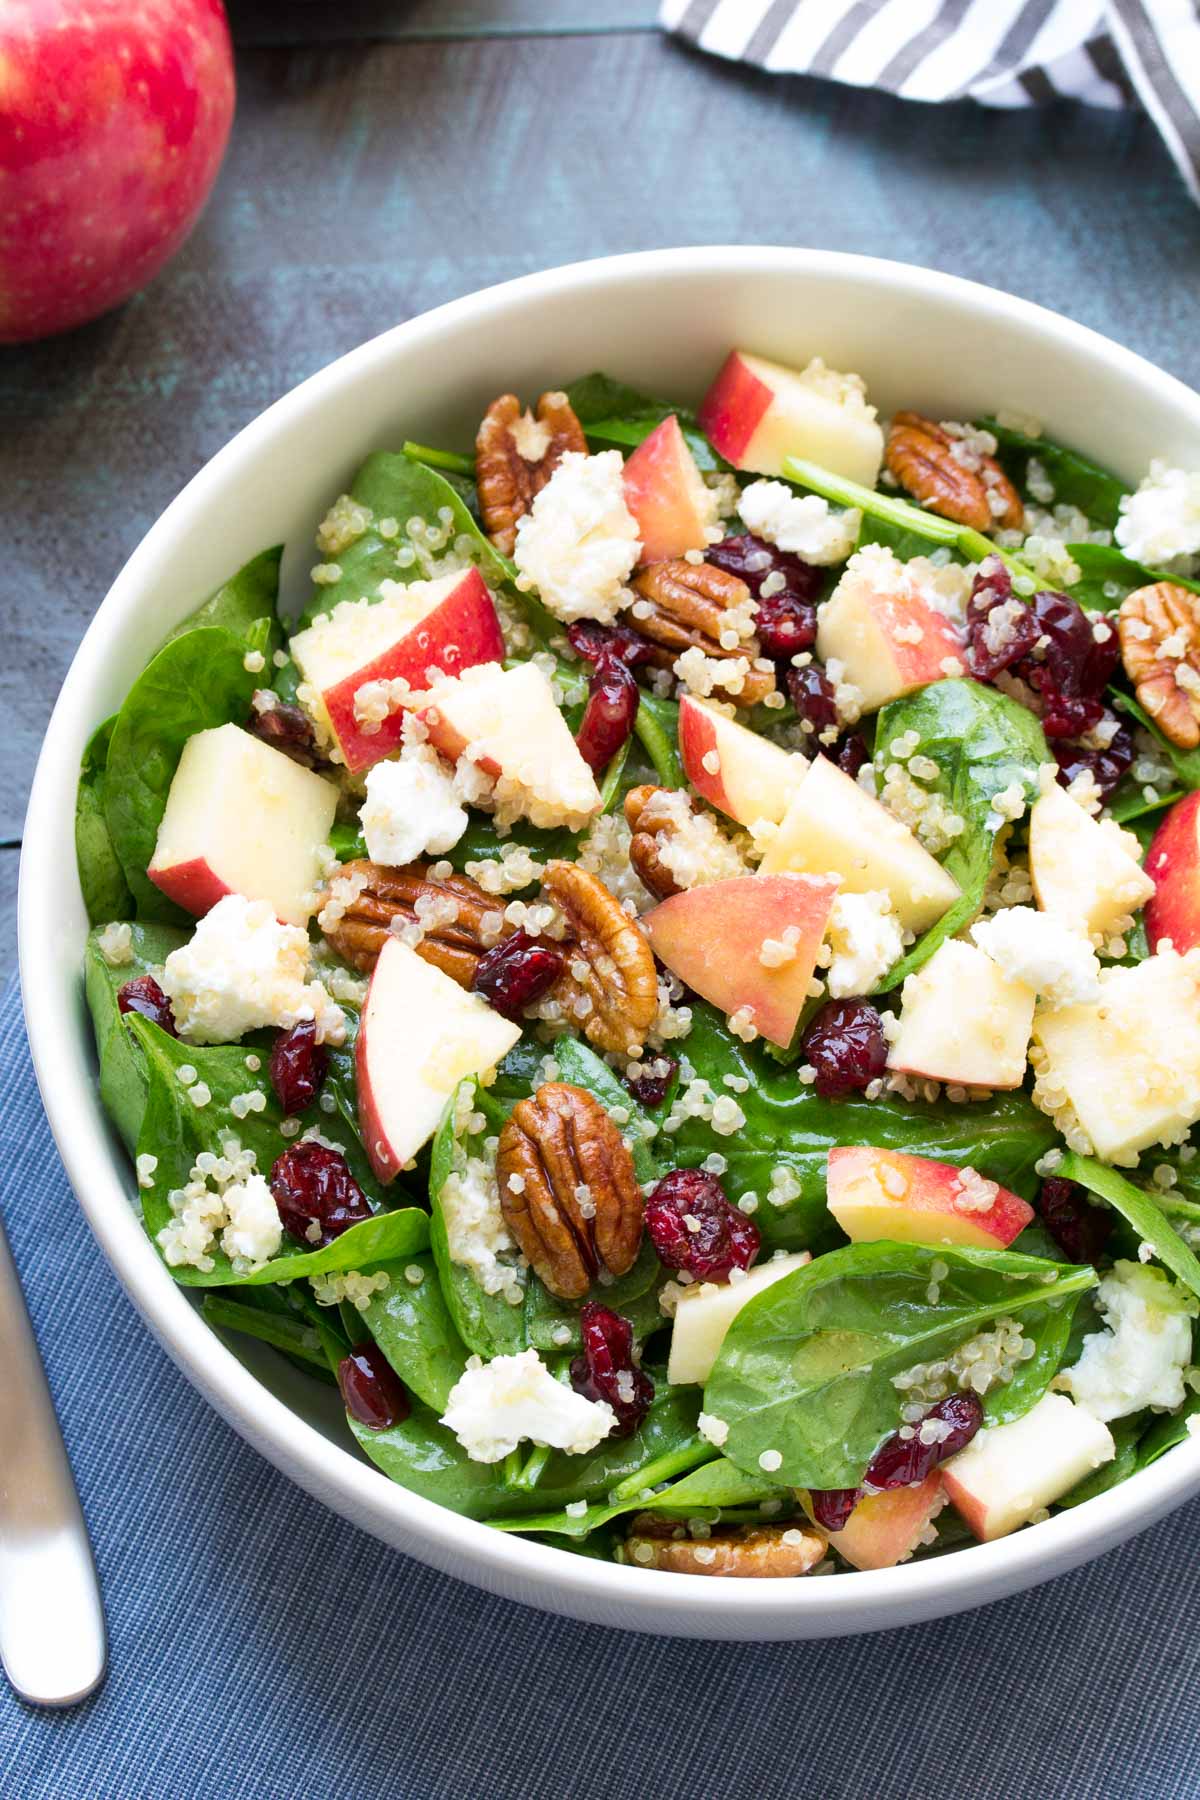 Spinach salad with apple, pecans and quinoa in a white bowl.